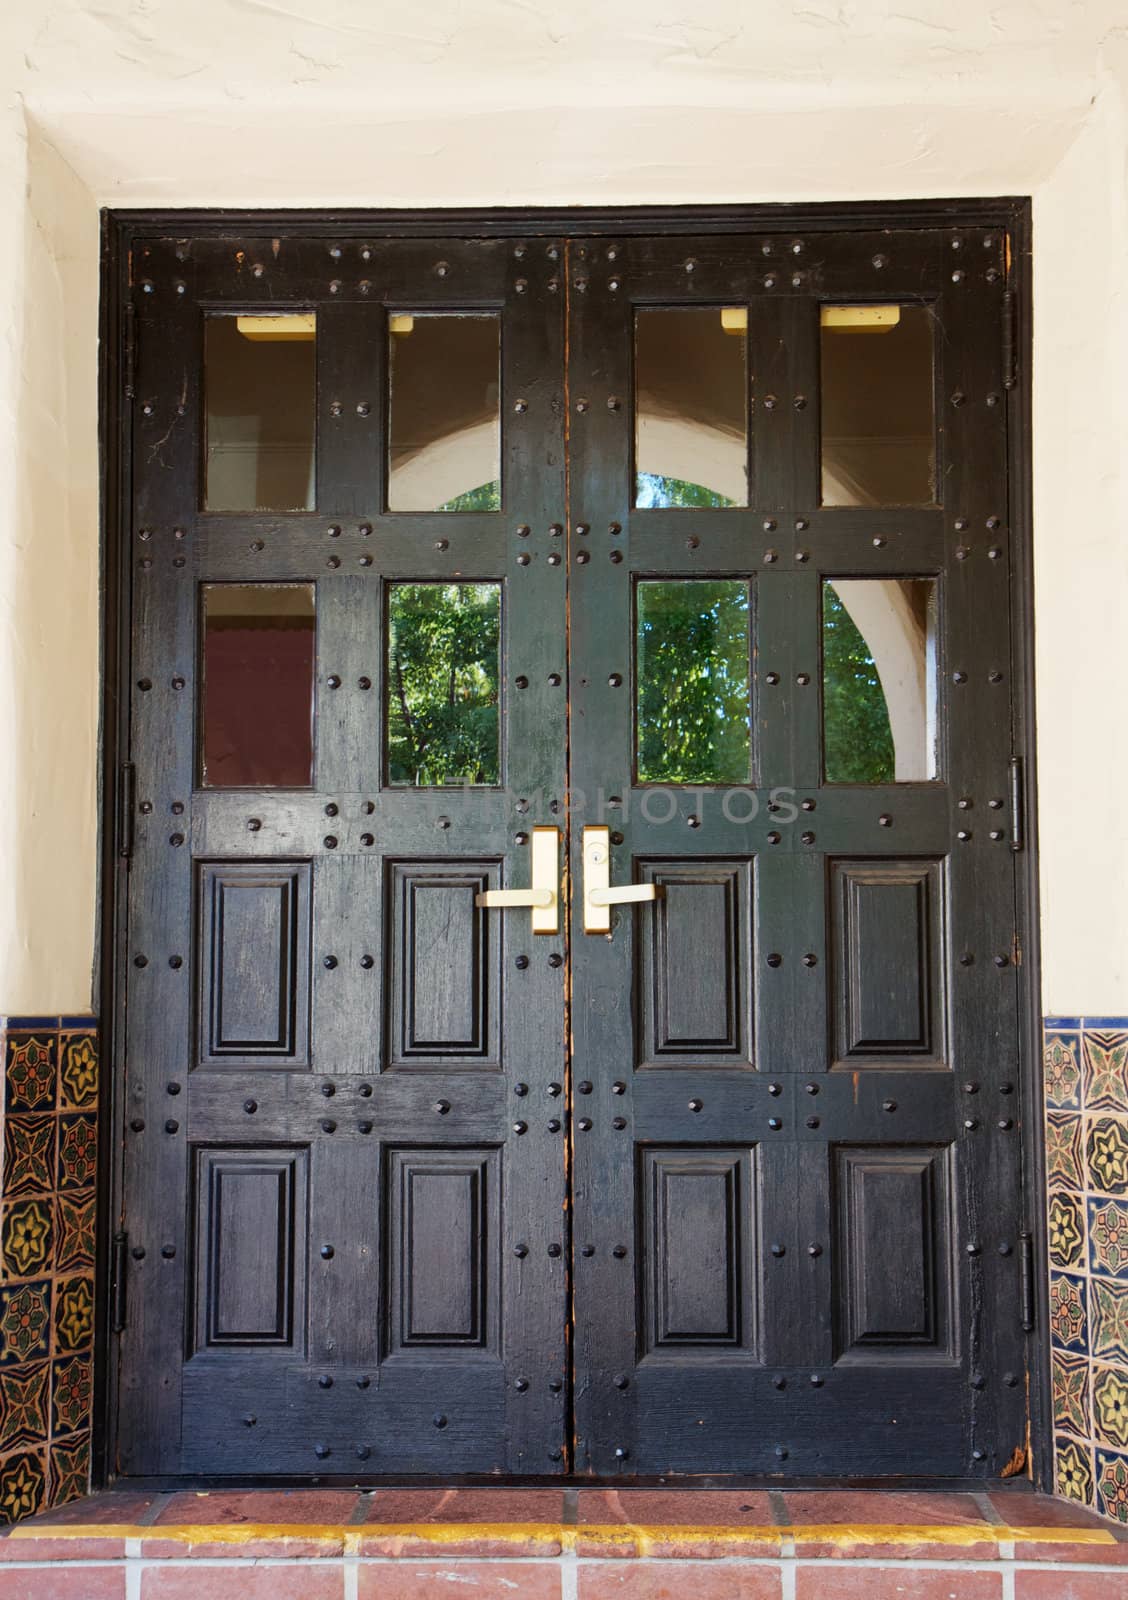 Black Spanish style double doors with tile and stucco walls